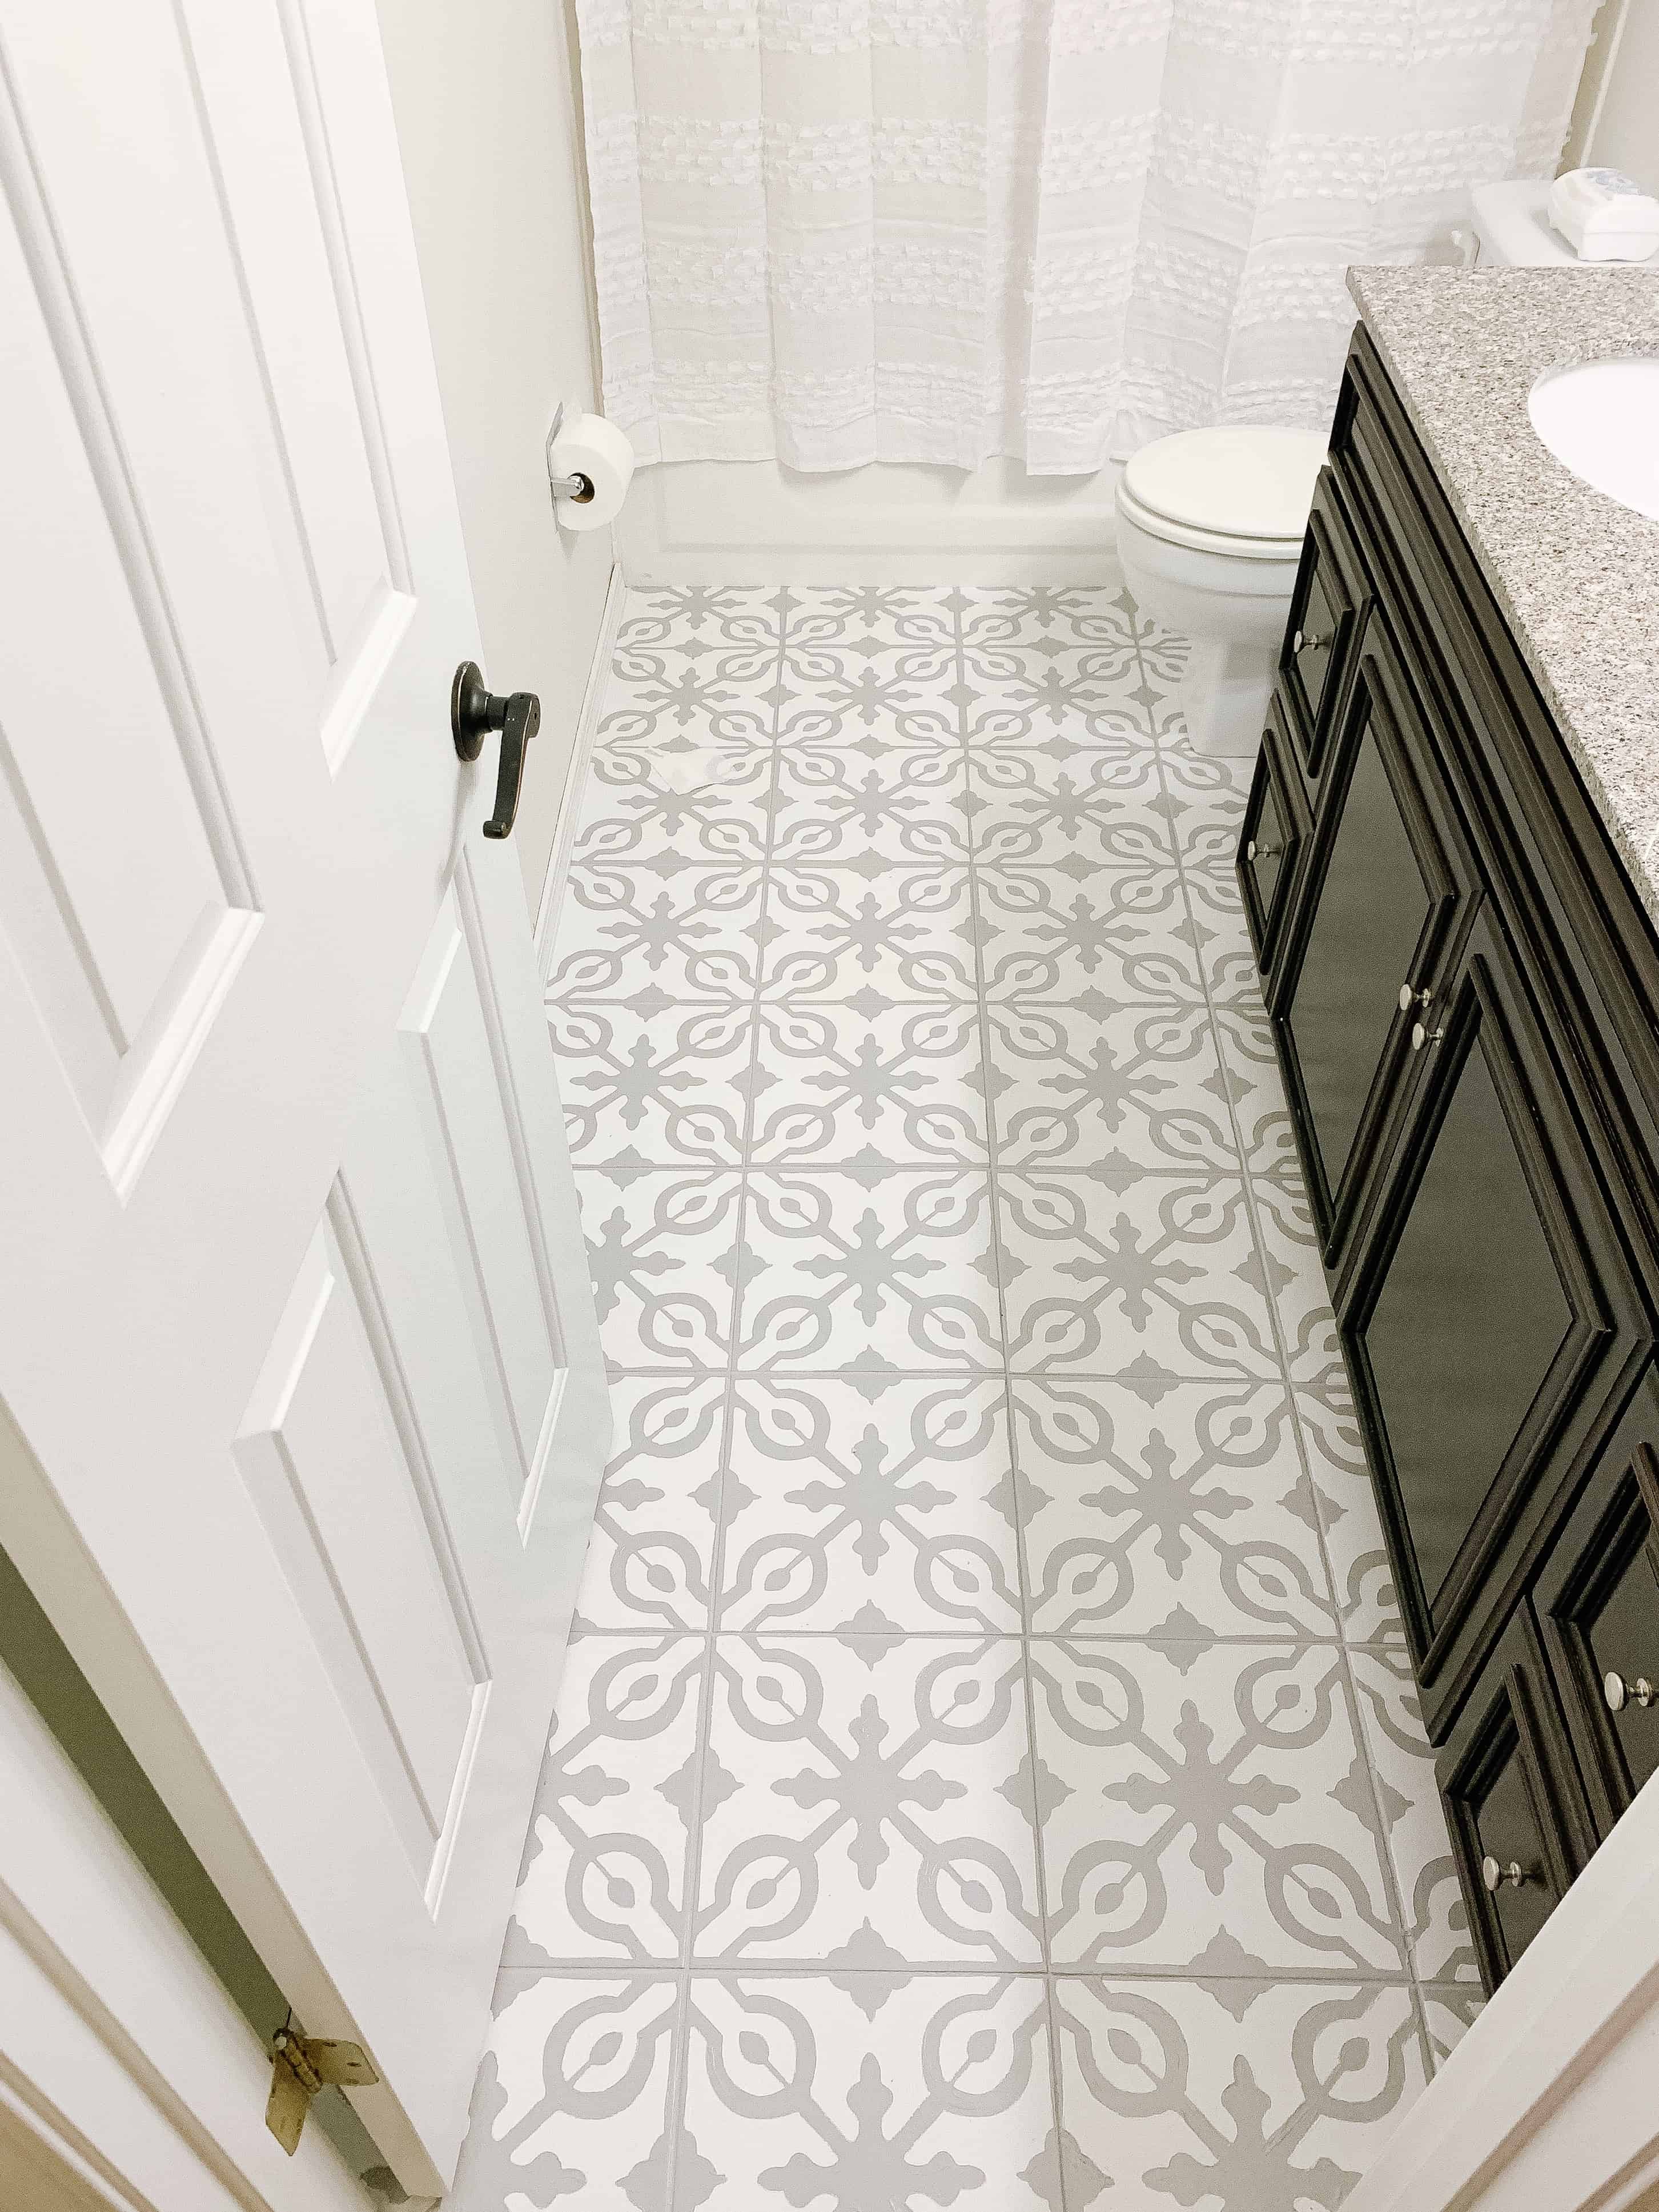 How To Paint Tile Floors, Can Floor Paint Be Used On Tiles